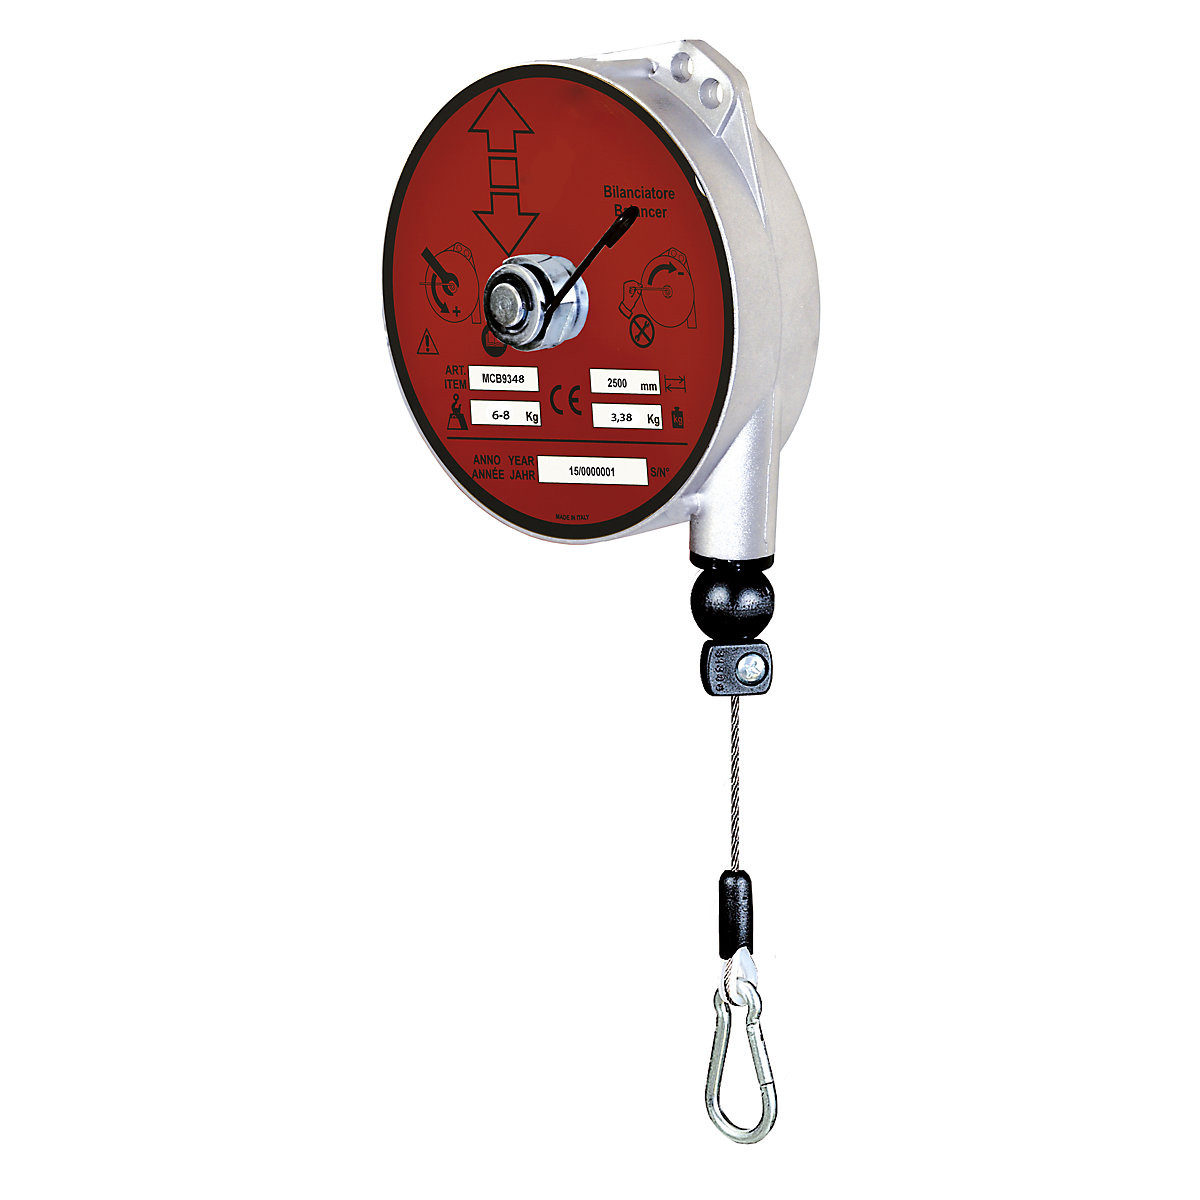 Professional balancer, with fall protection and automatic locking mechanism, max. load 6 – 8 kg-3